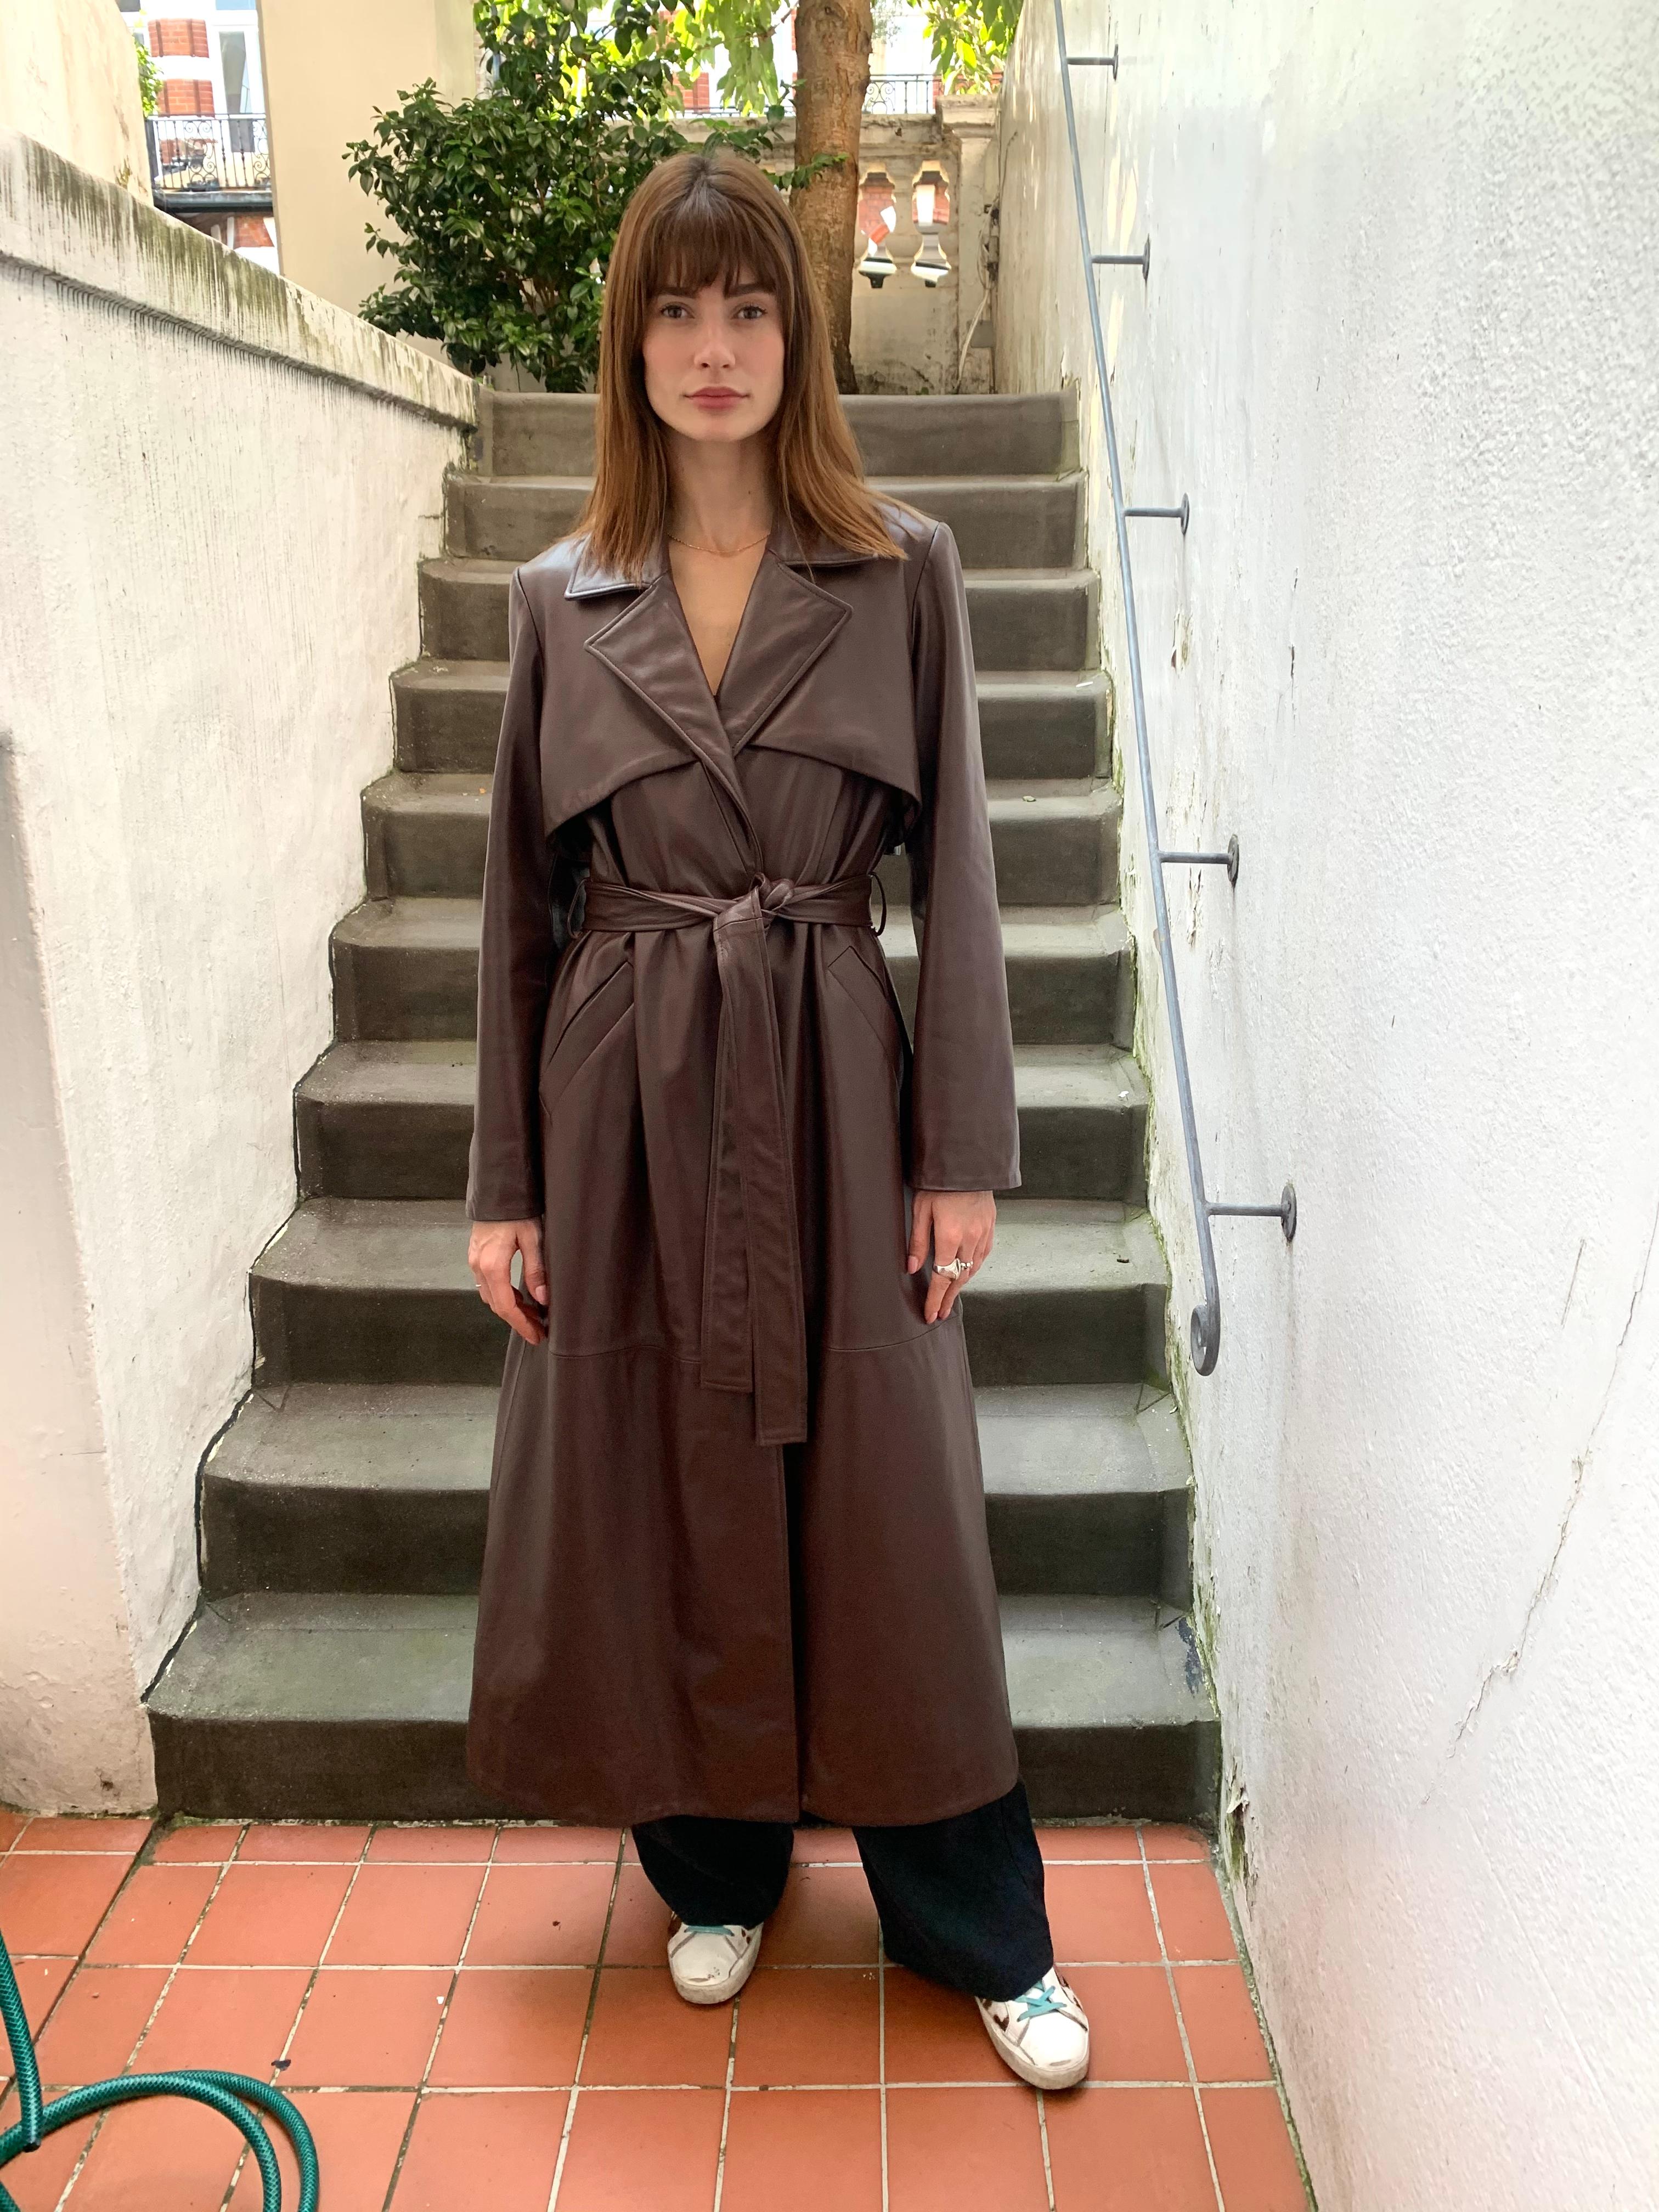 Black Verheyen London Leather Trench Coat in Chocolate Brown - Size uk 8 For Sale